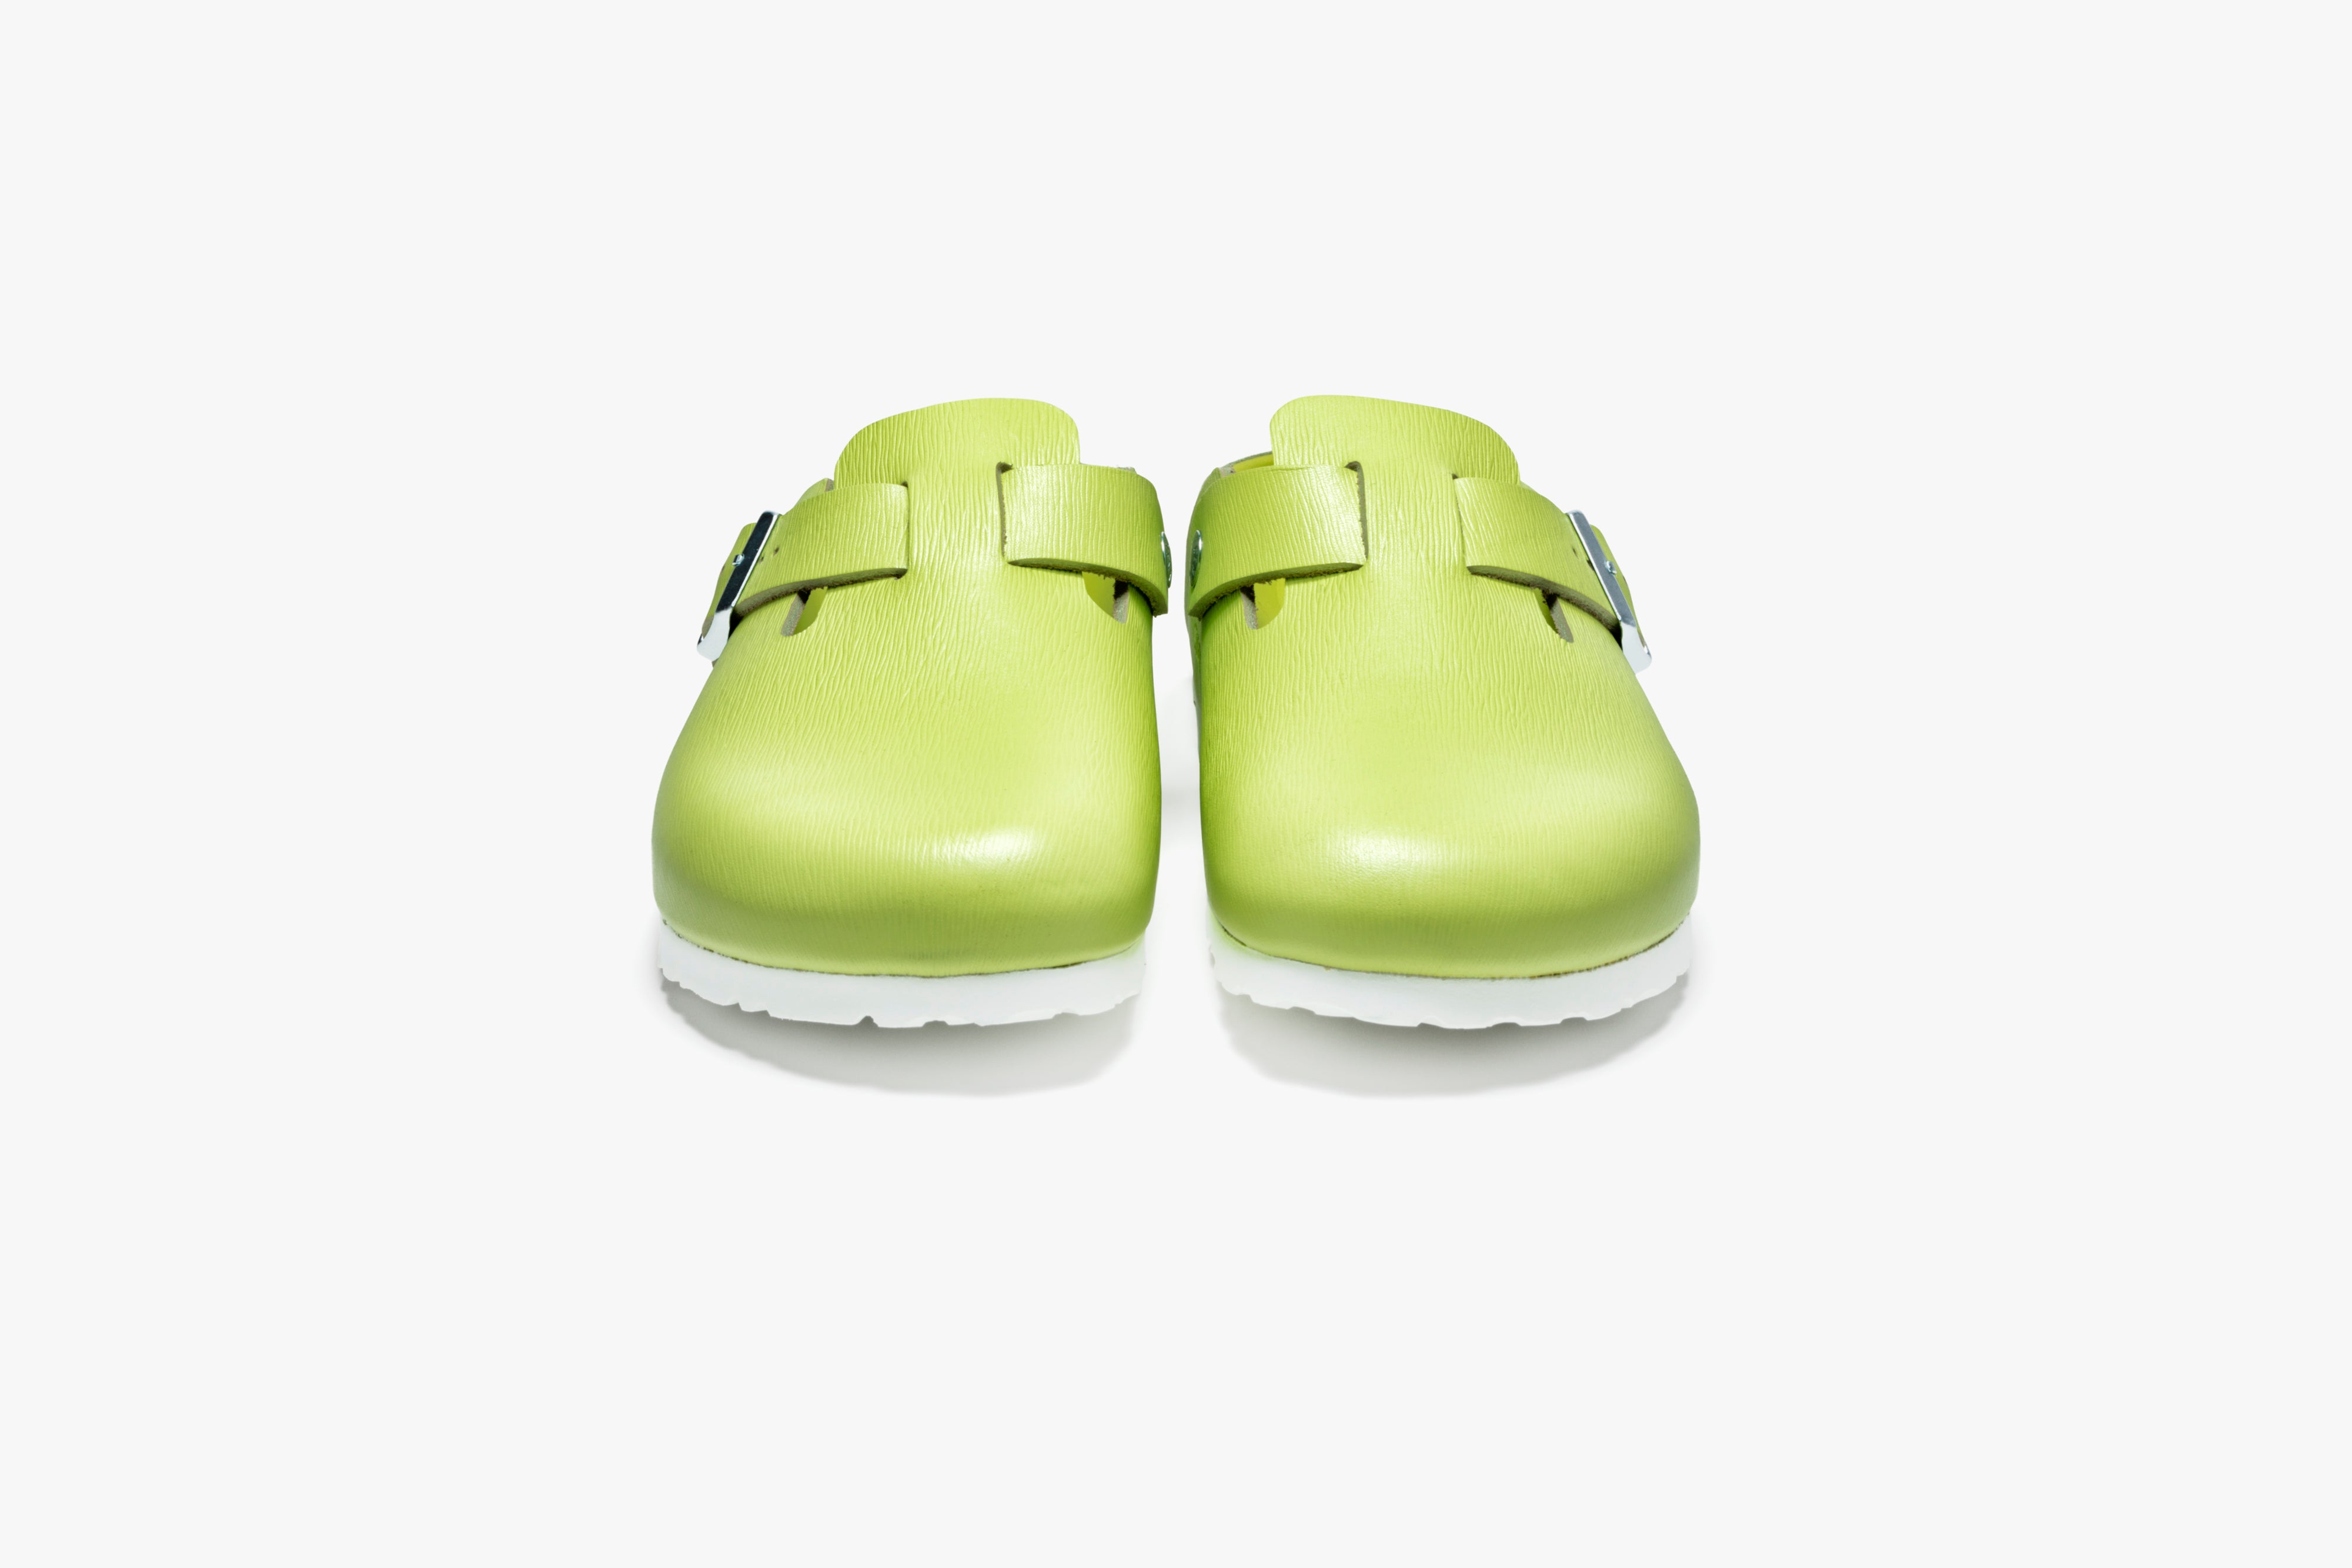 Concepts x Birkenstock Lime Grooved Leather Boston